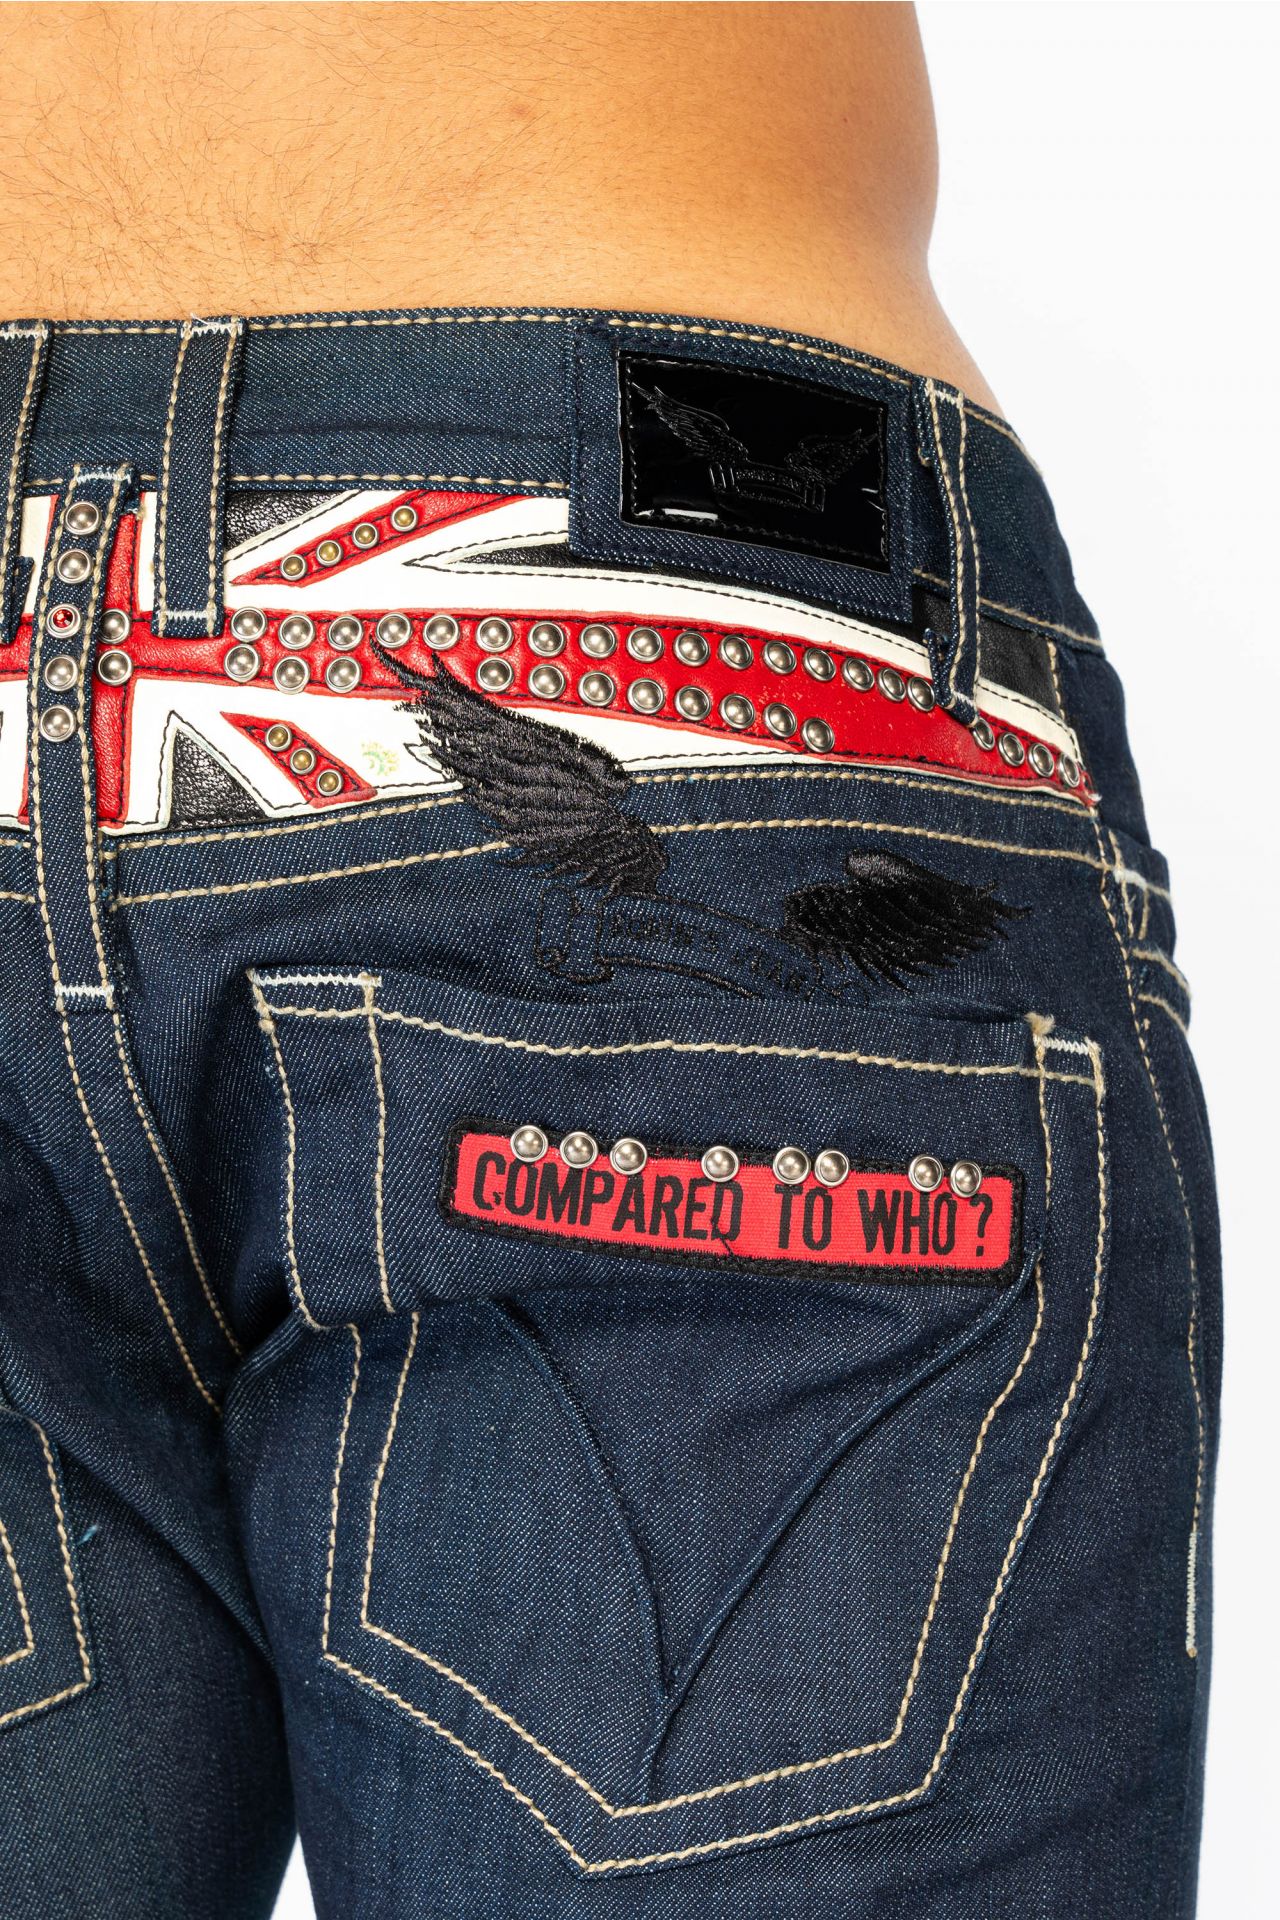 BRITISH FLAG MENS CLASSIC SLIM FIT JEANS WITH LEATHER AND STUDS